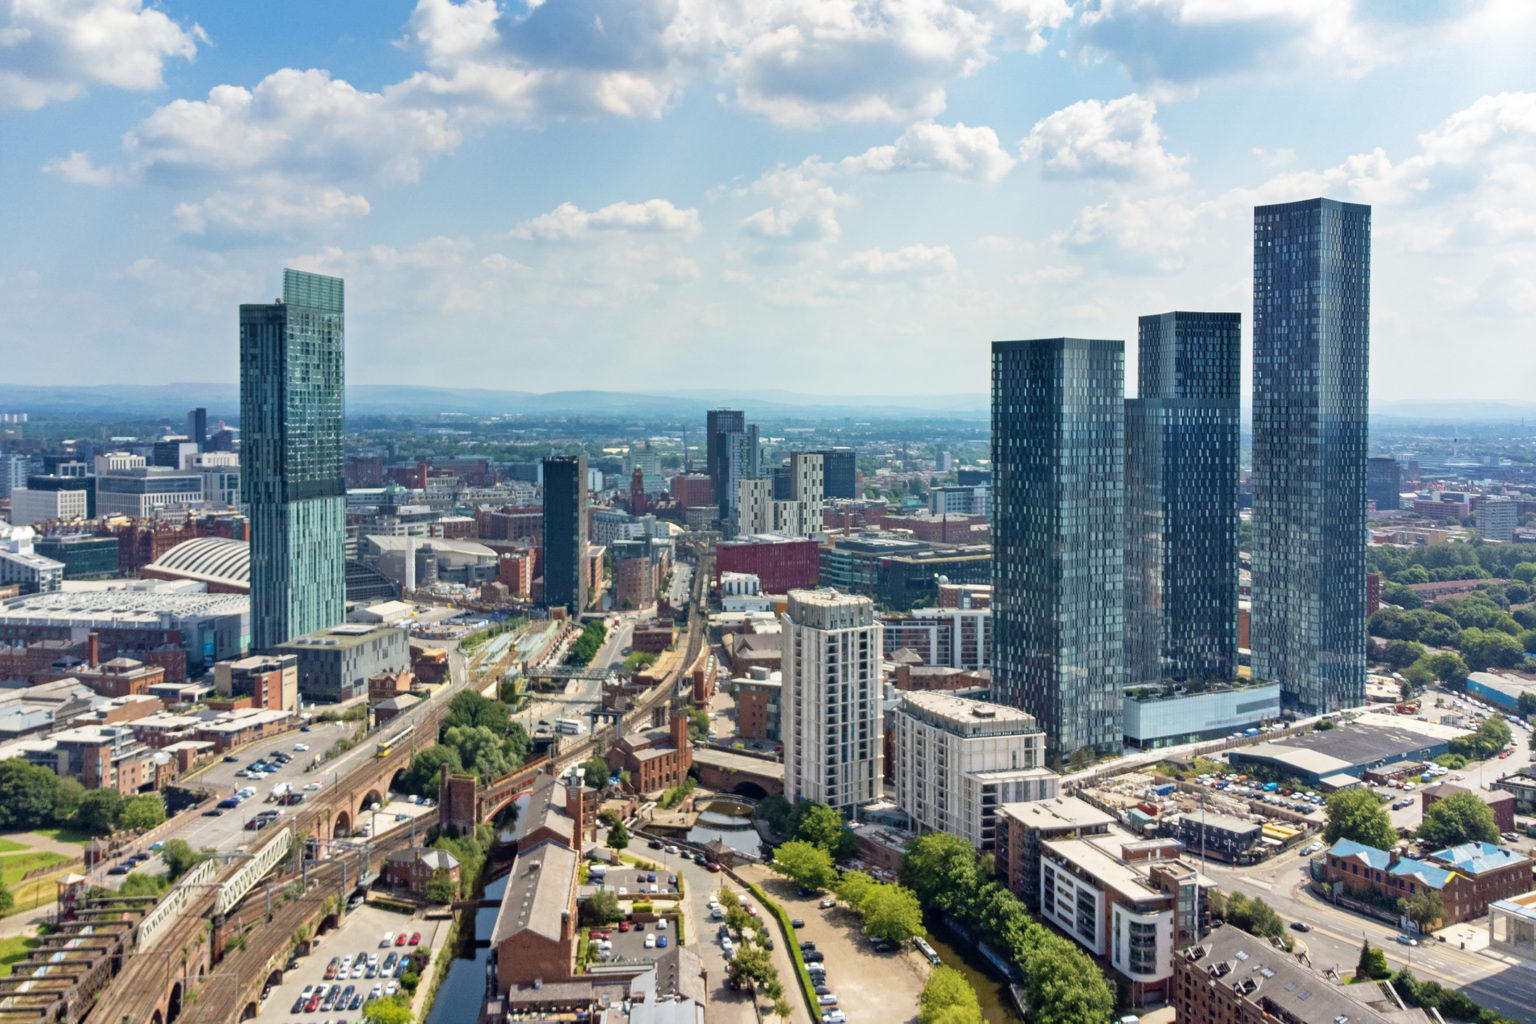 An aerial view of the Manchester skyline from Deansgate, showing multiple high-rise properties